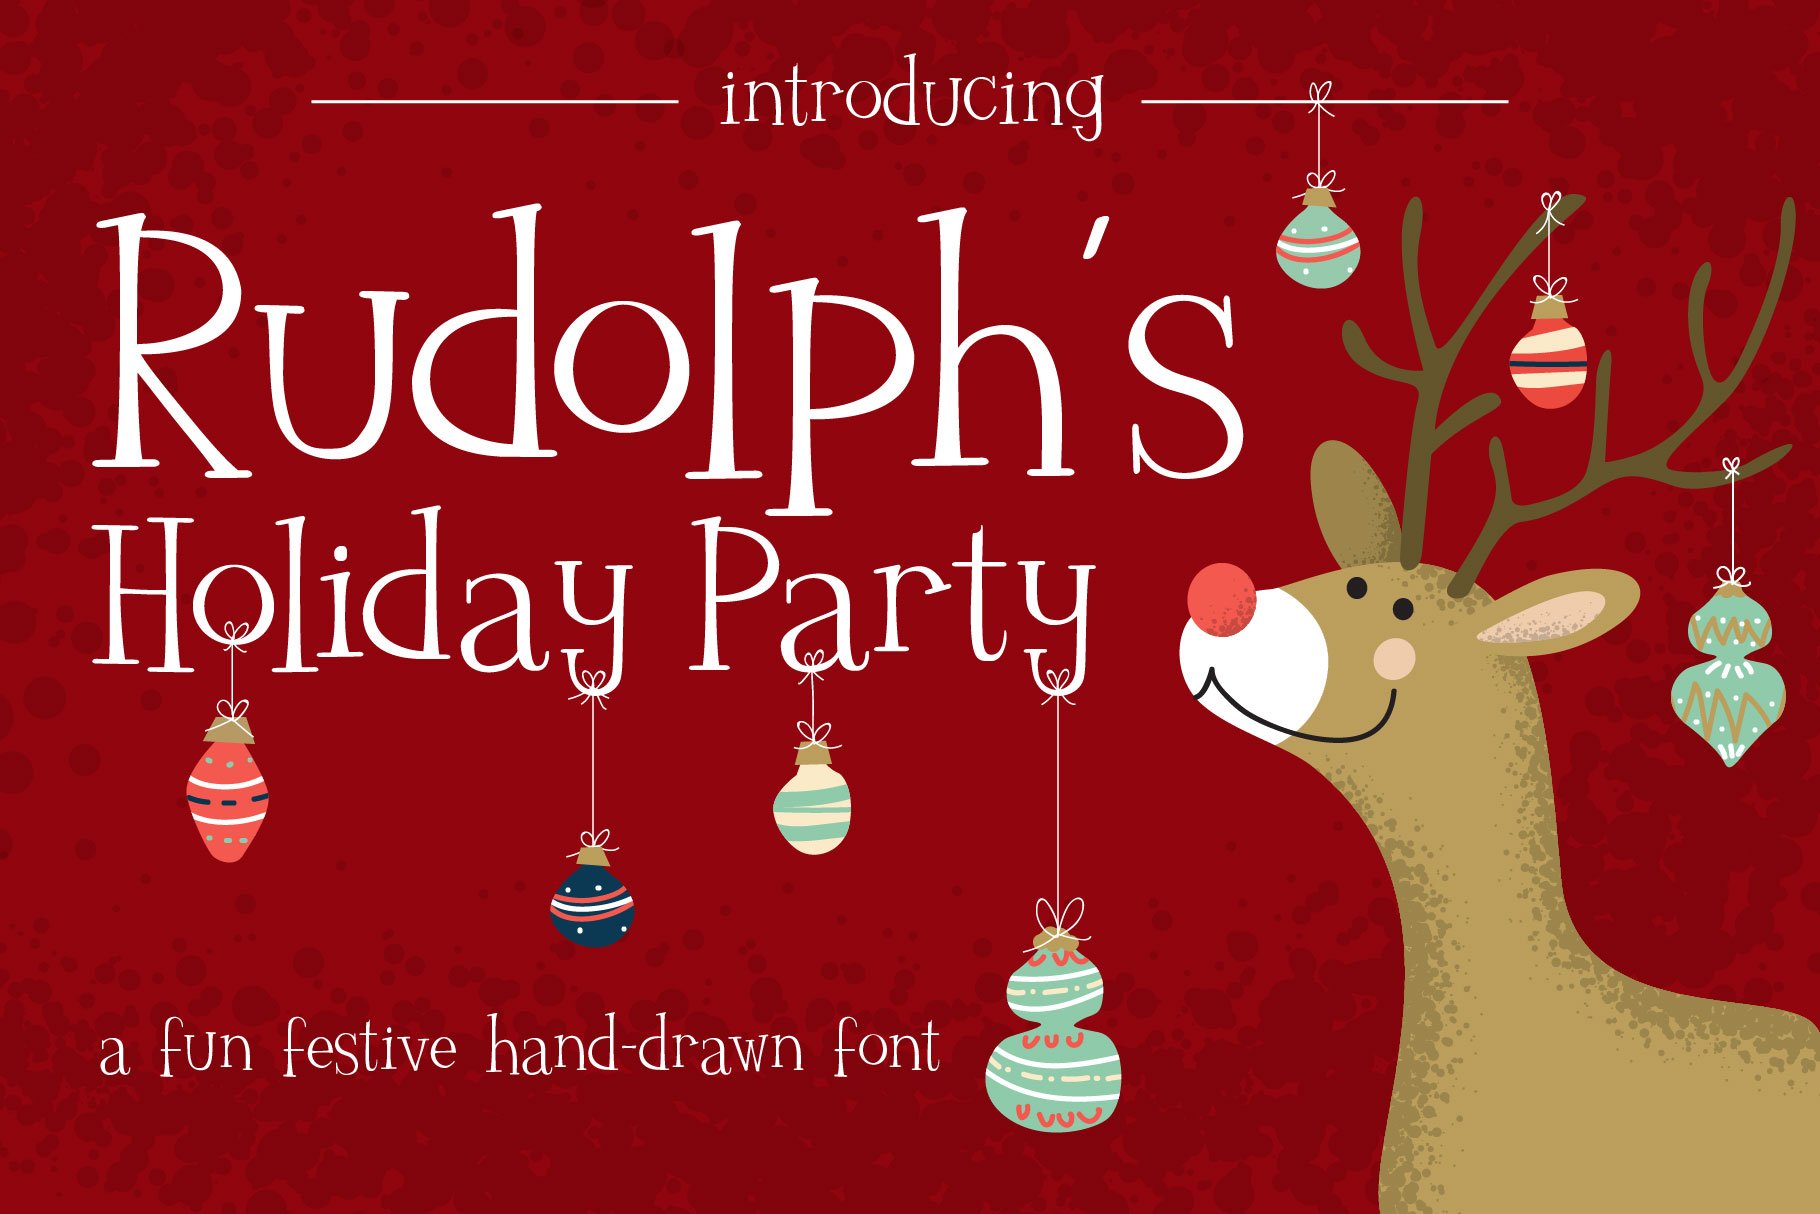 Rudolph's Holiday Party cover image.